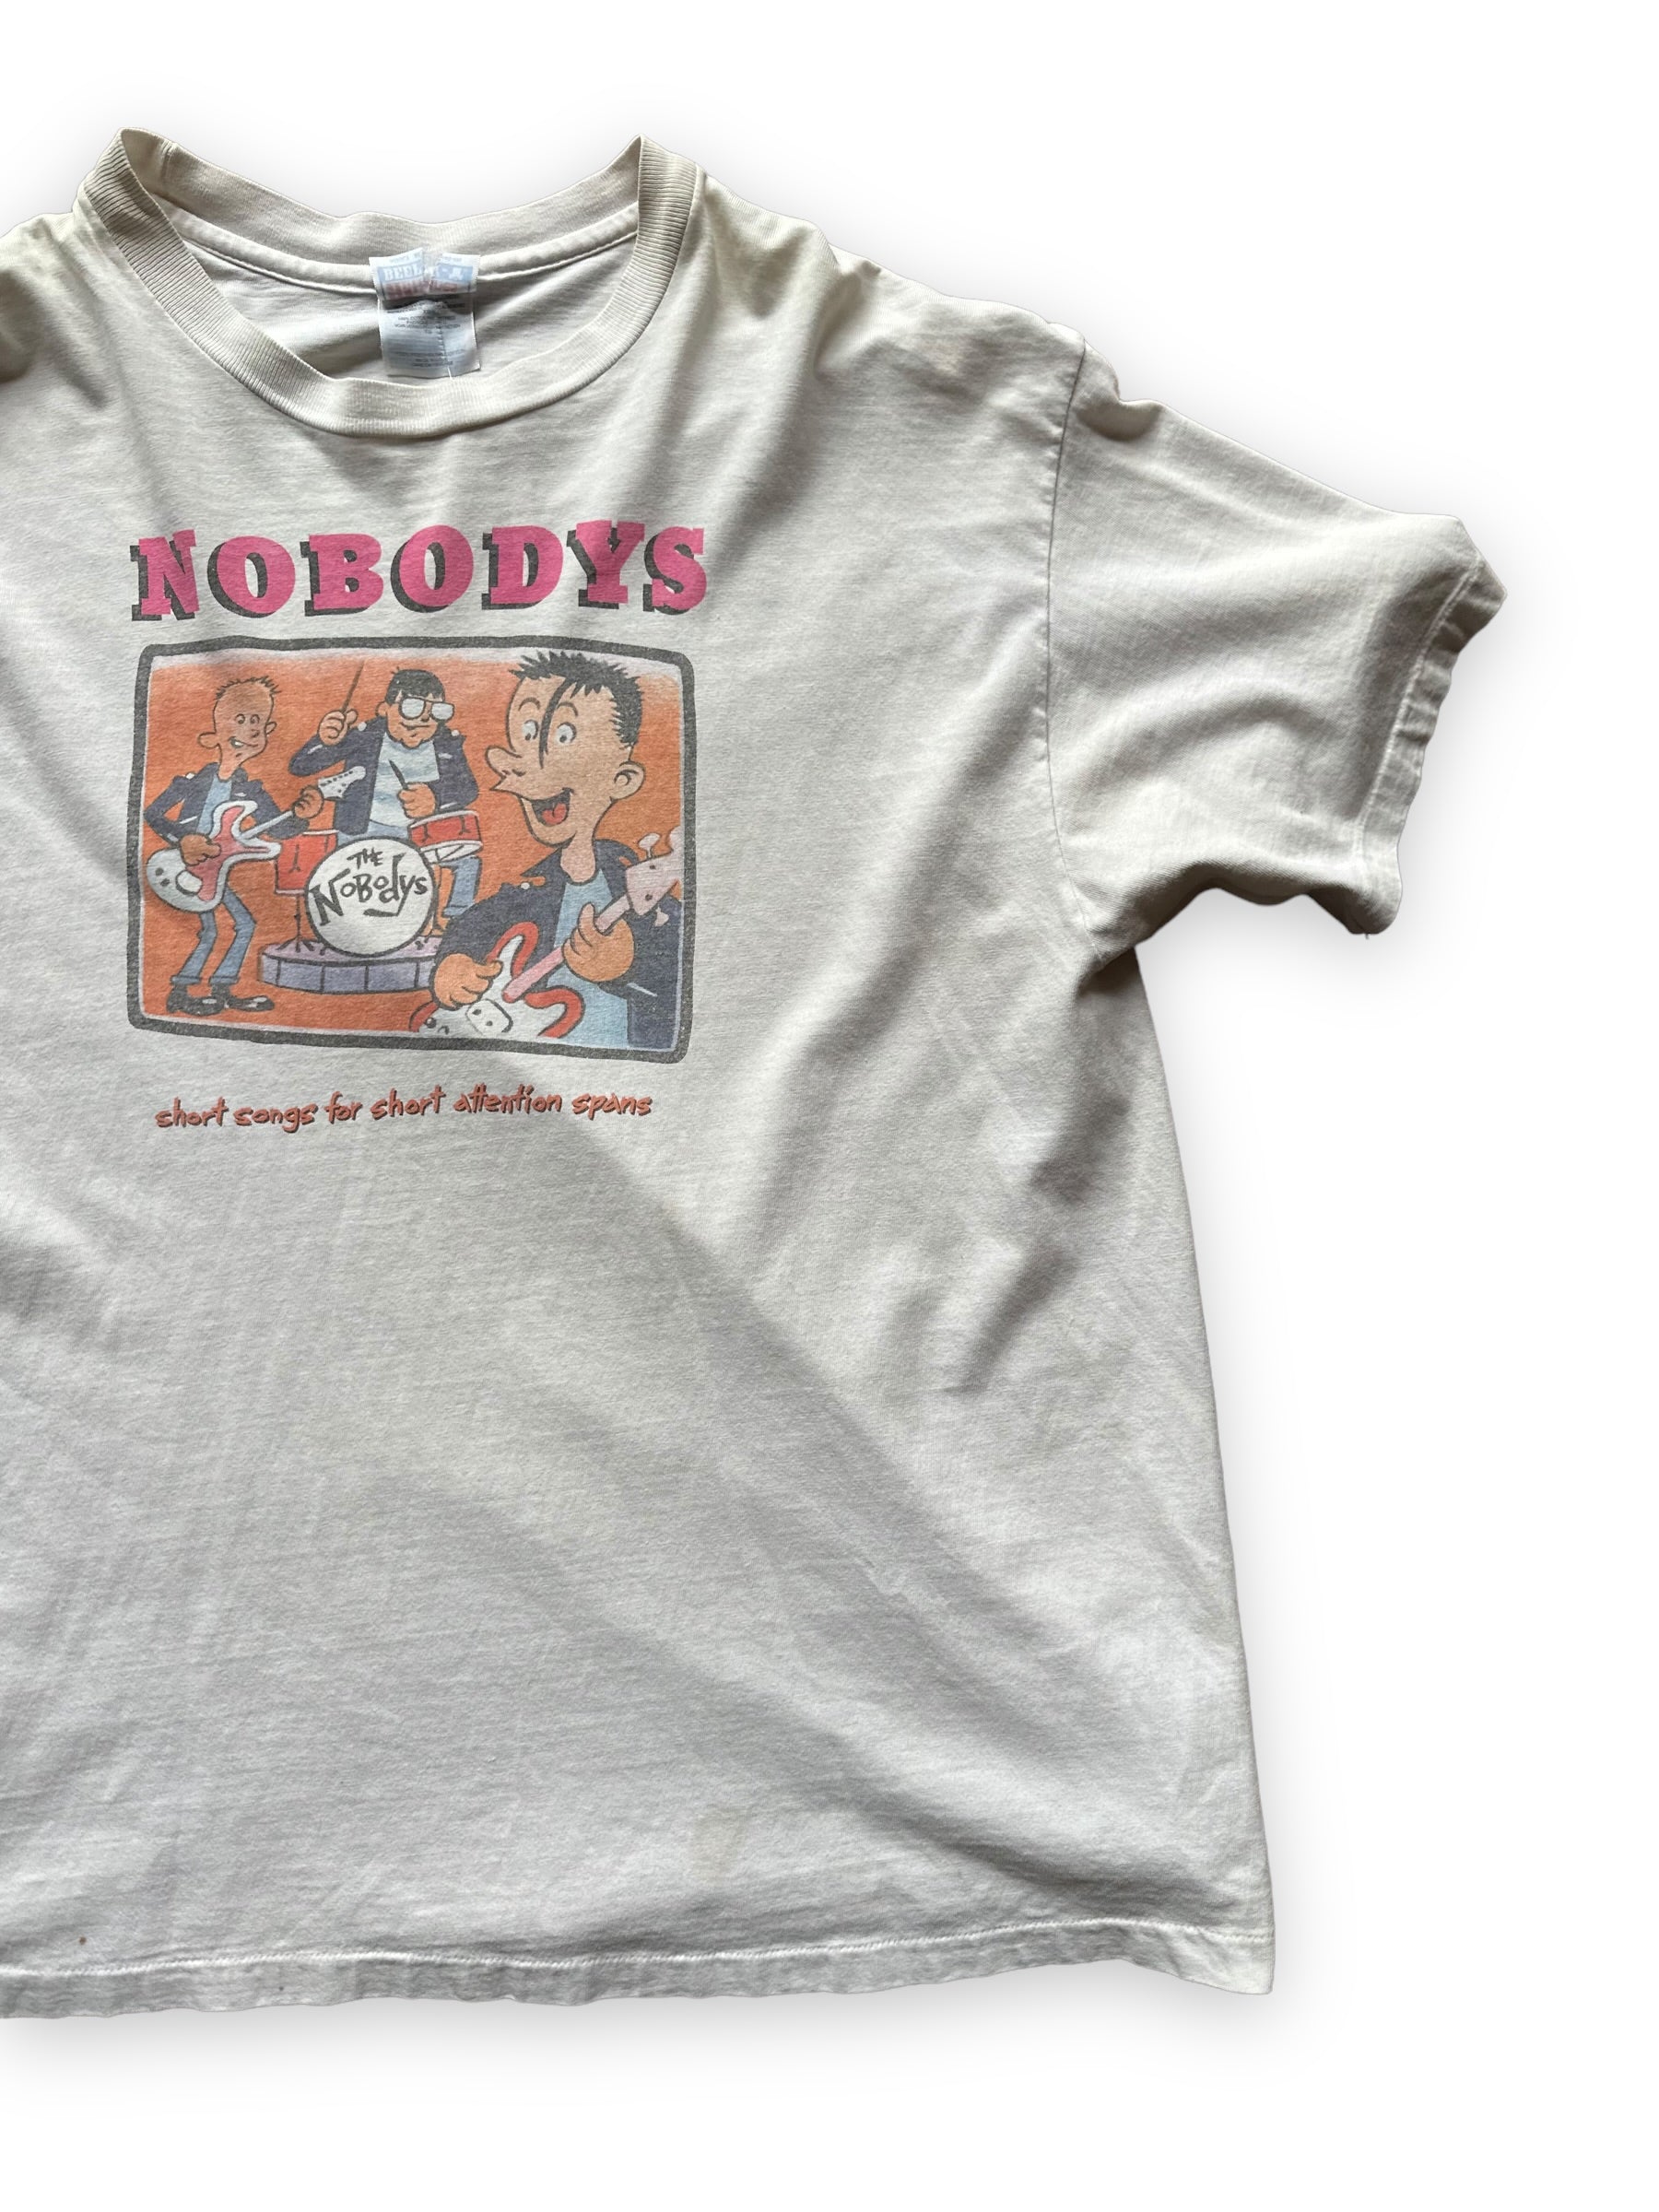 Left Side Front View of Vintage The Nobodys Short Songs For Short Attention Spans Tee SZ XL |  Hopeless Records Rock Tee | Barn Owl Vintage Seattle